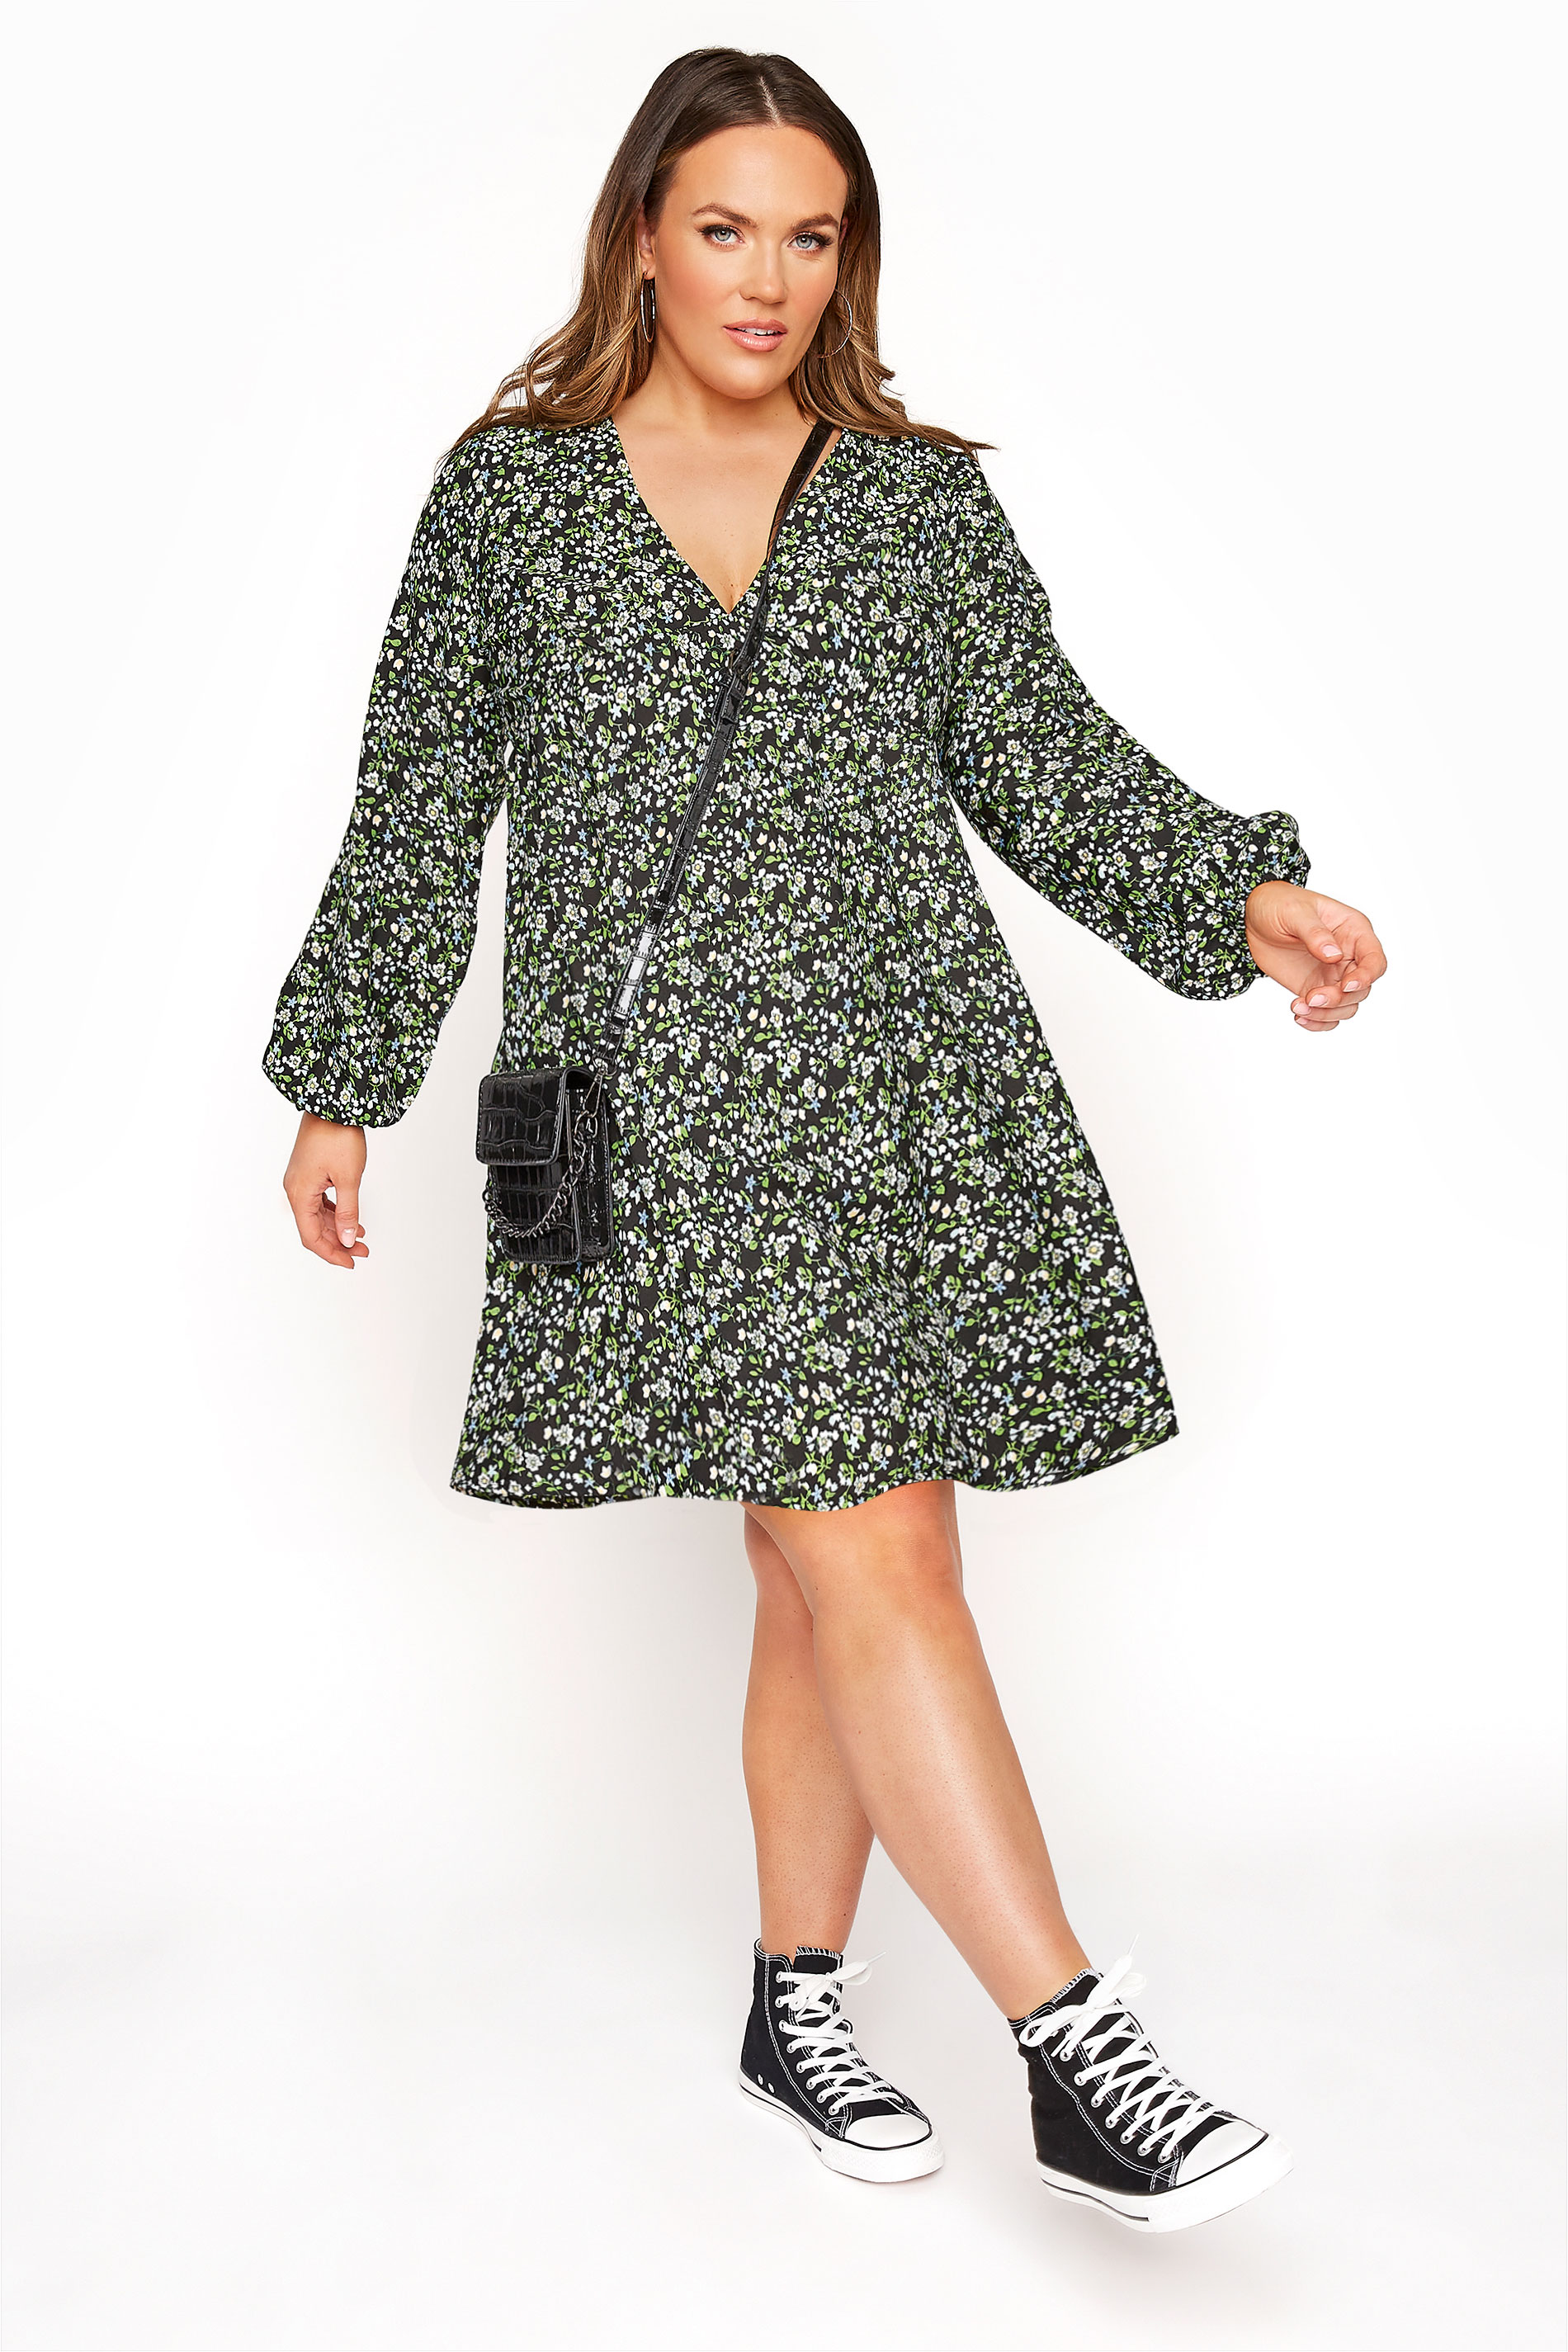 LIMITED COLLECTION Black & Green Ditsy Tea Dress